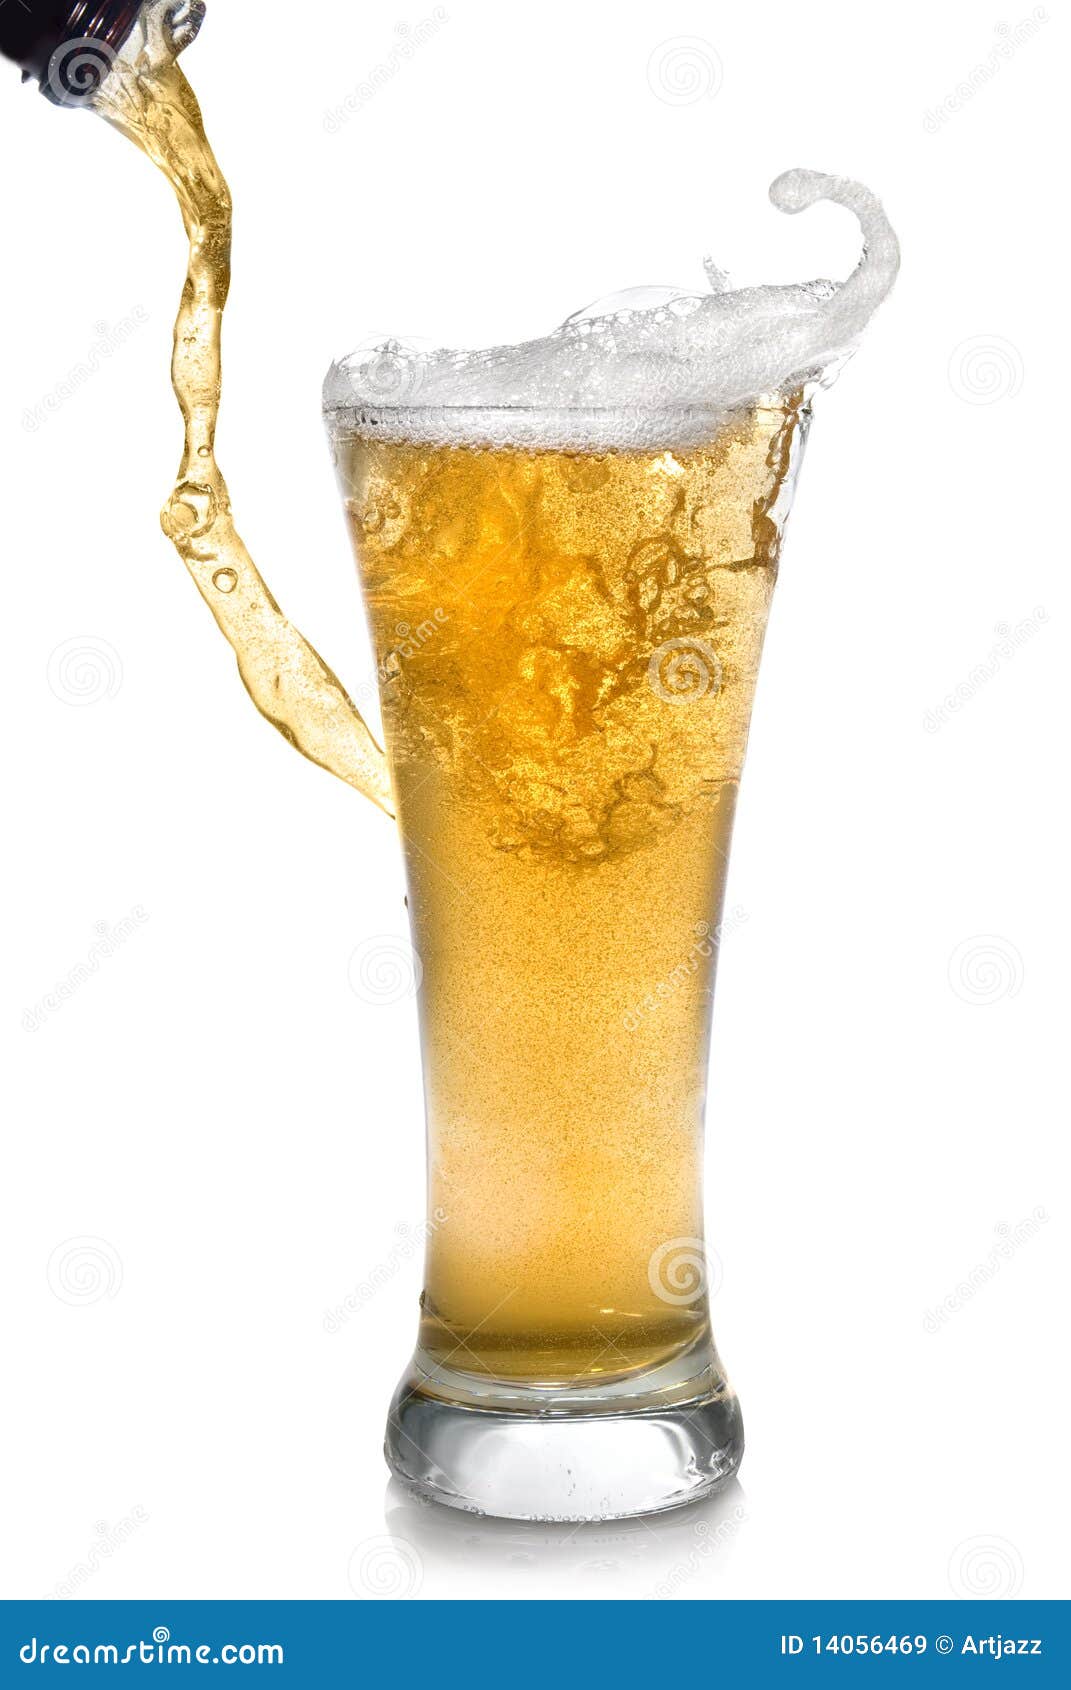 Beer Pouring From Bottle Into Glass Stock Image - Image: 14056469